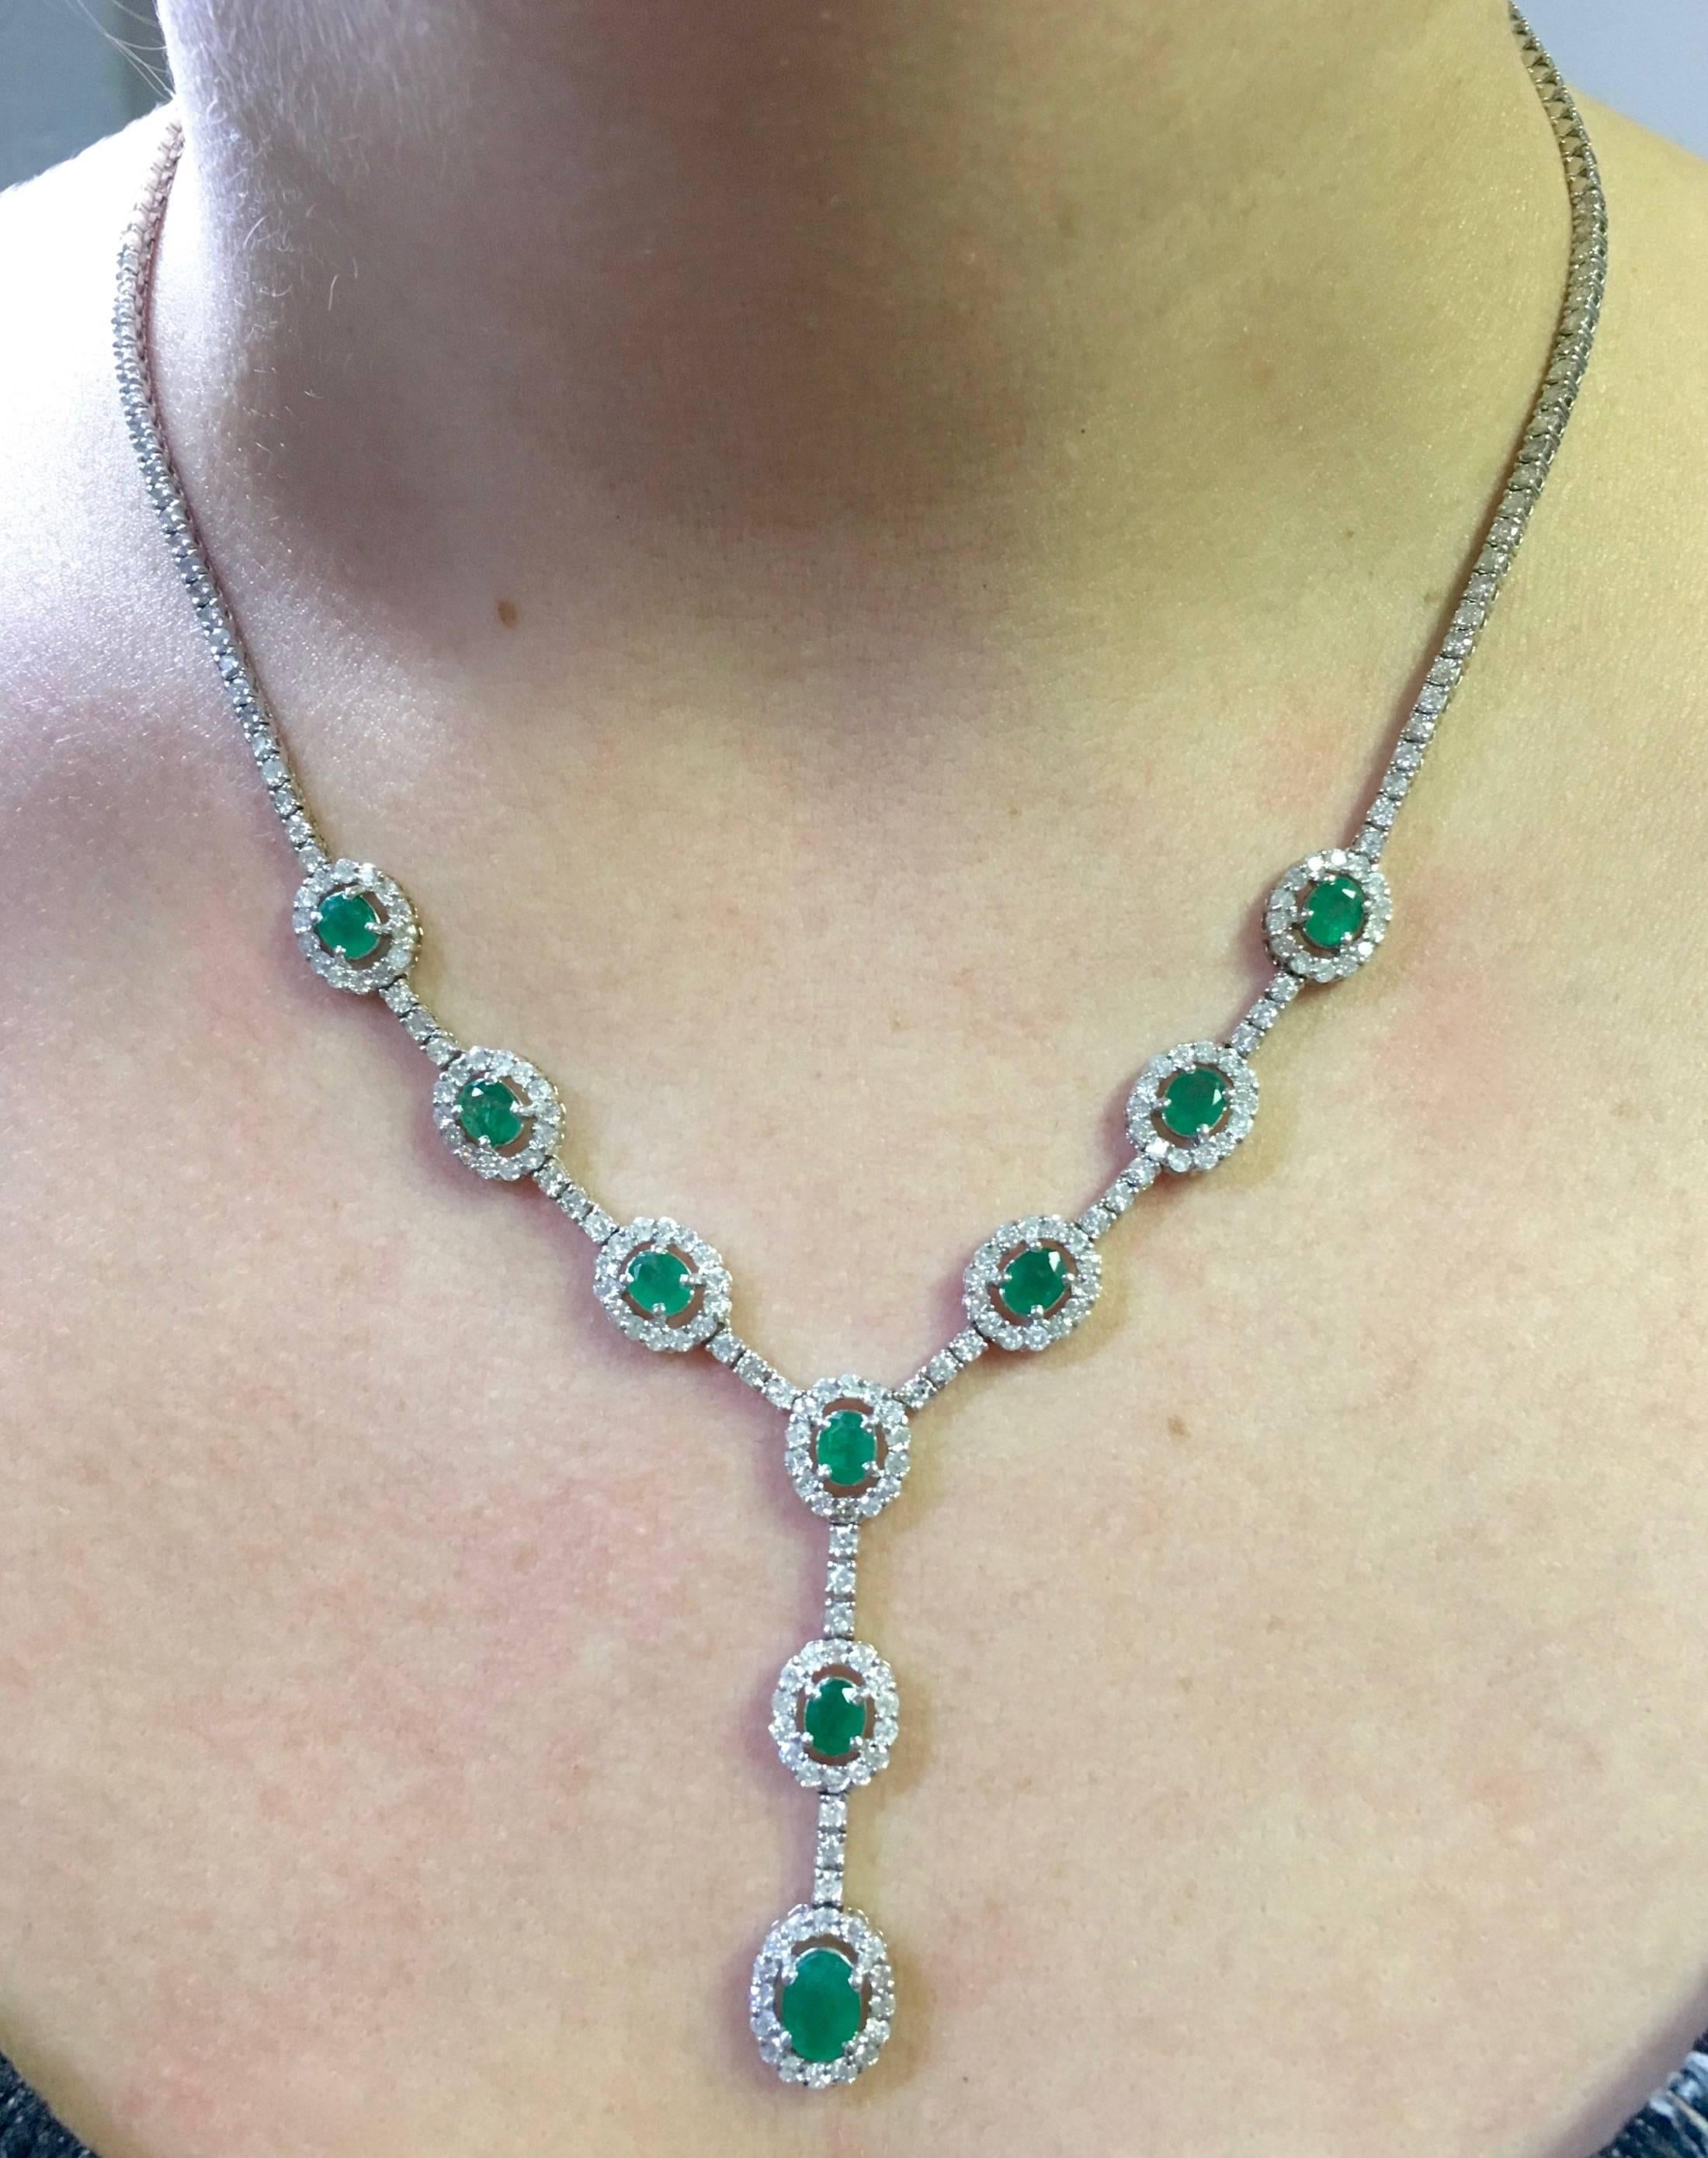 Elegant 14K white gold necklace houses approximately 4.25CTW of Round Brilliant Cut Diamonds, which display an average color of G-J and an average clarity of I1. The Diamonds elegantly surround 9 Oval Cut Emeralds. The center emerald measures